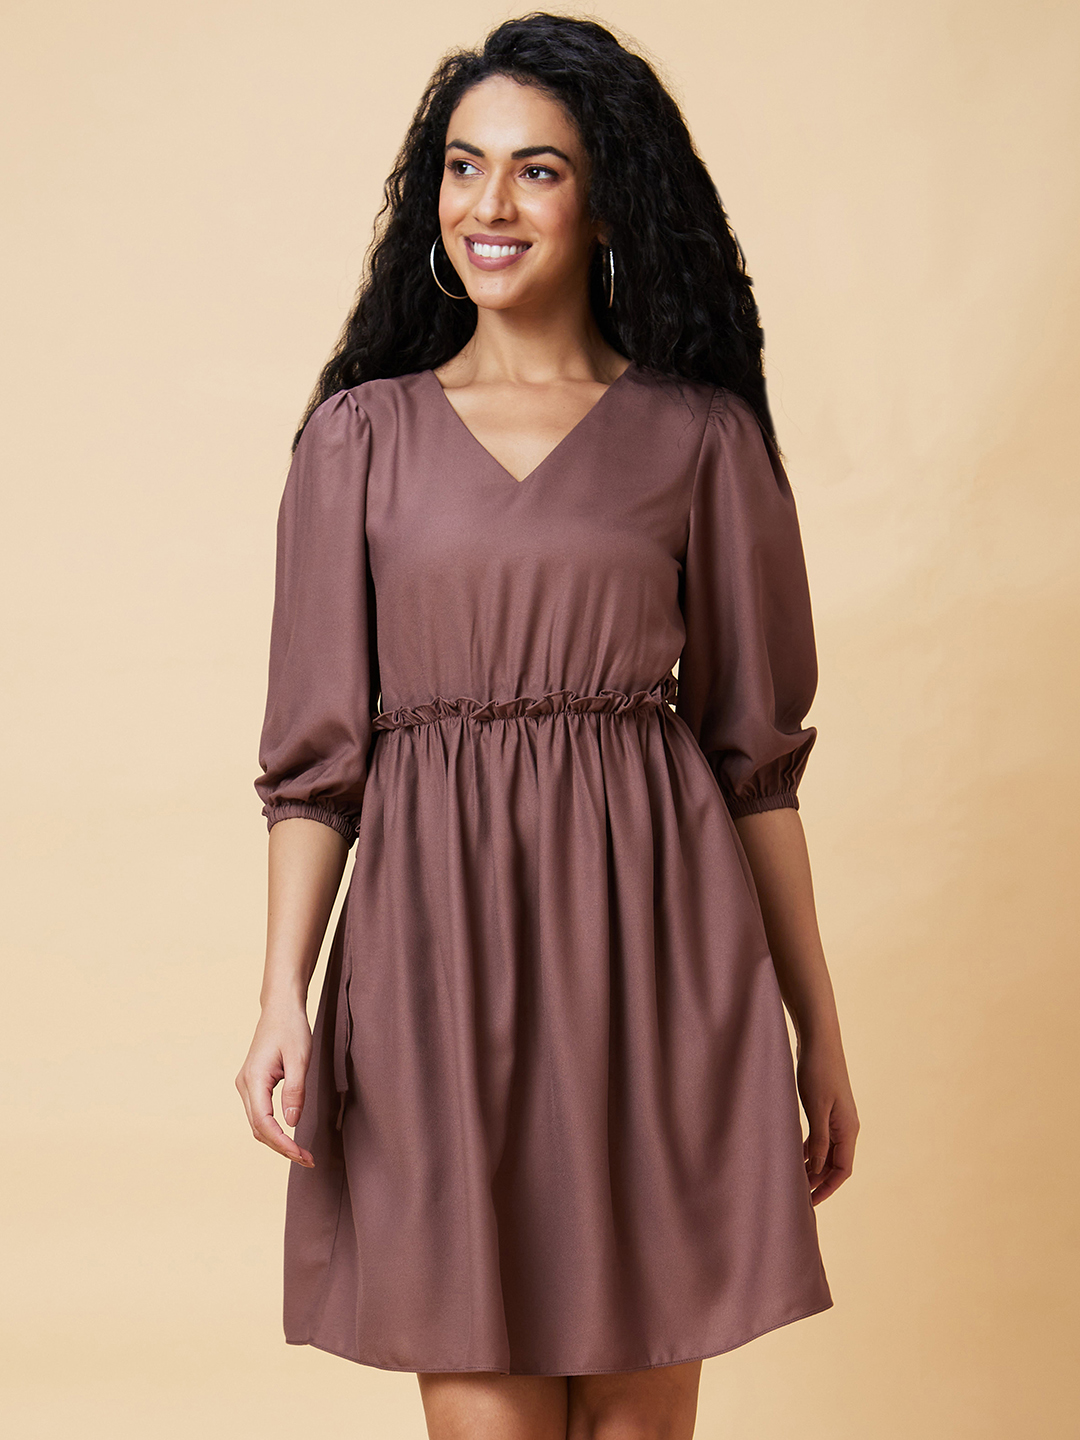 Globus Women Taupe Solid V-Neck Casual A-Line Dress